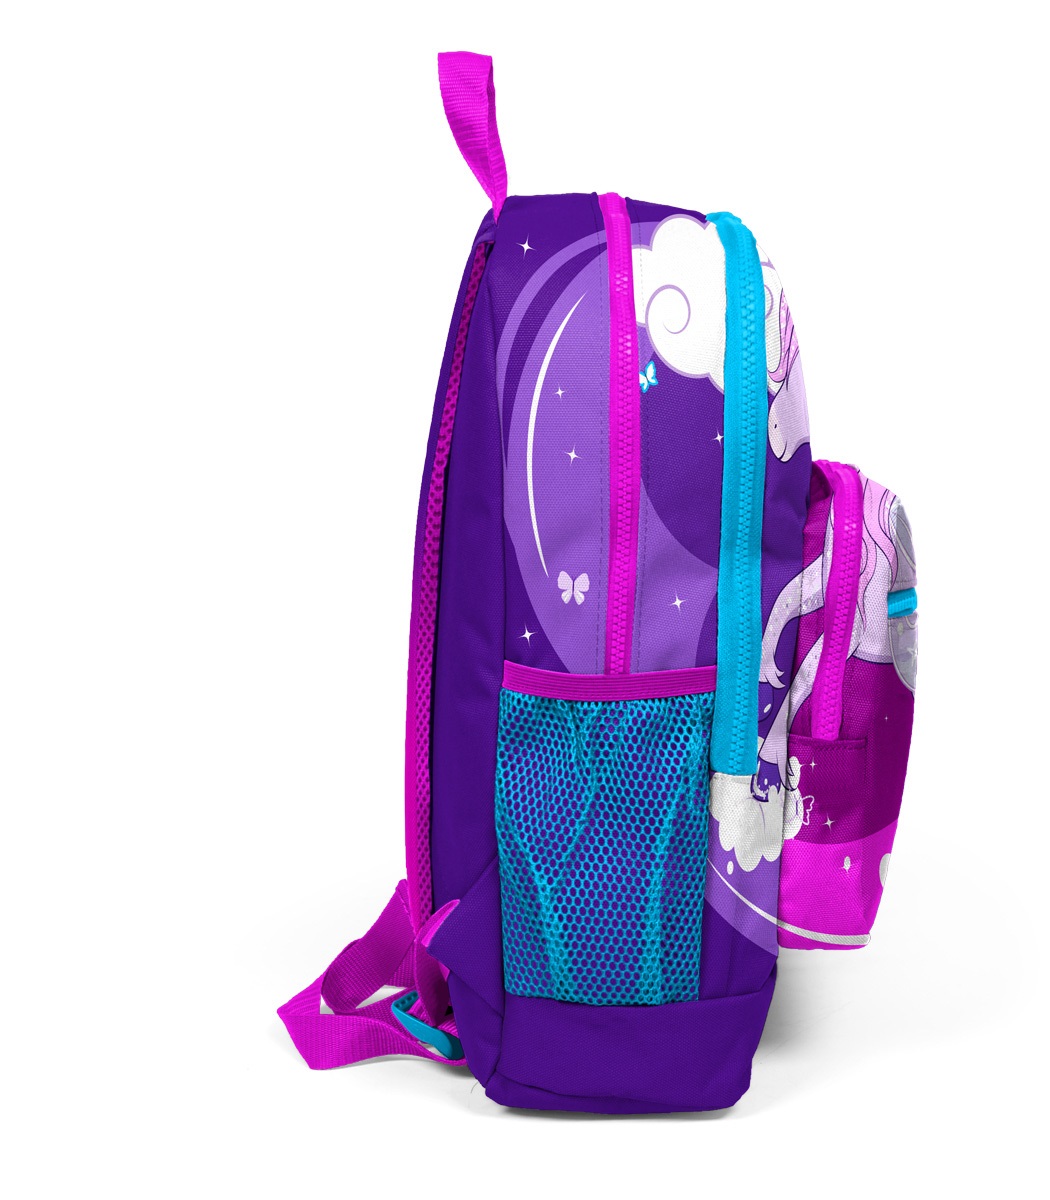 Coral High Kids Four Compartment USB School Backpack - Purple Pink Unicorn Patterned